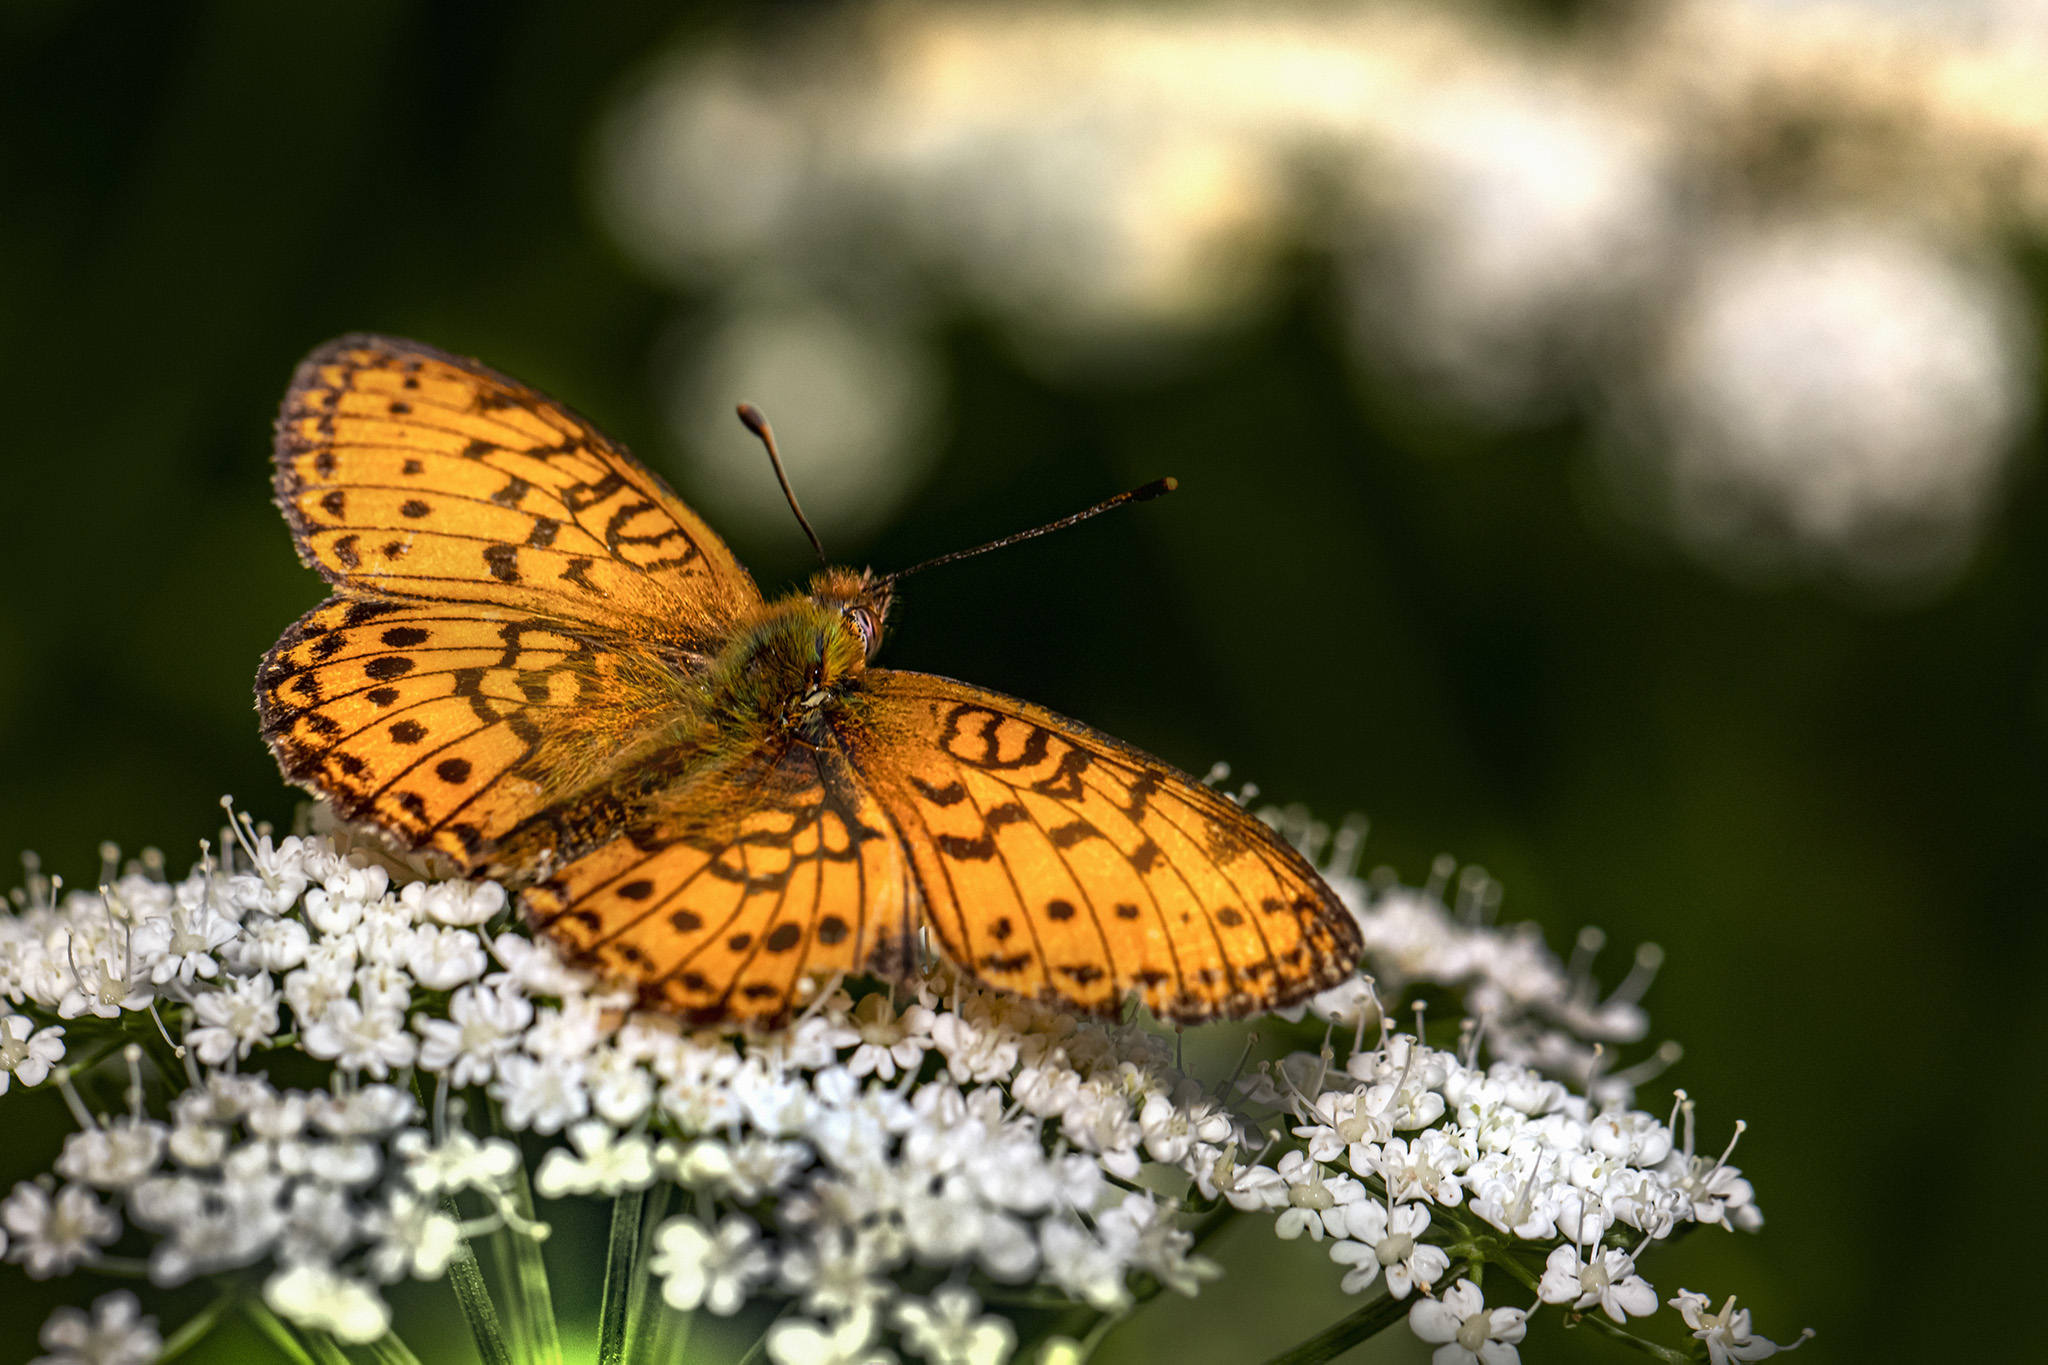 Lesser marbled fritillary (Brenthis ino)